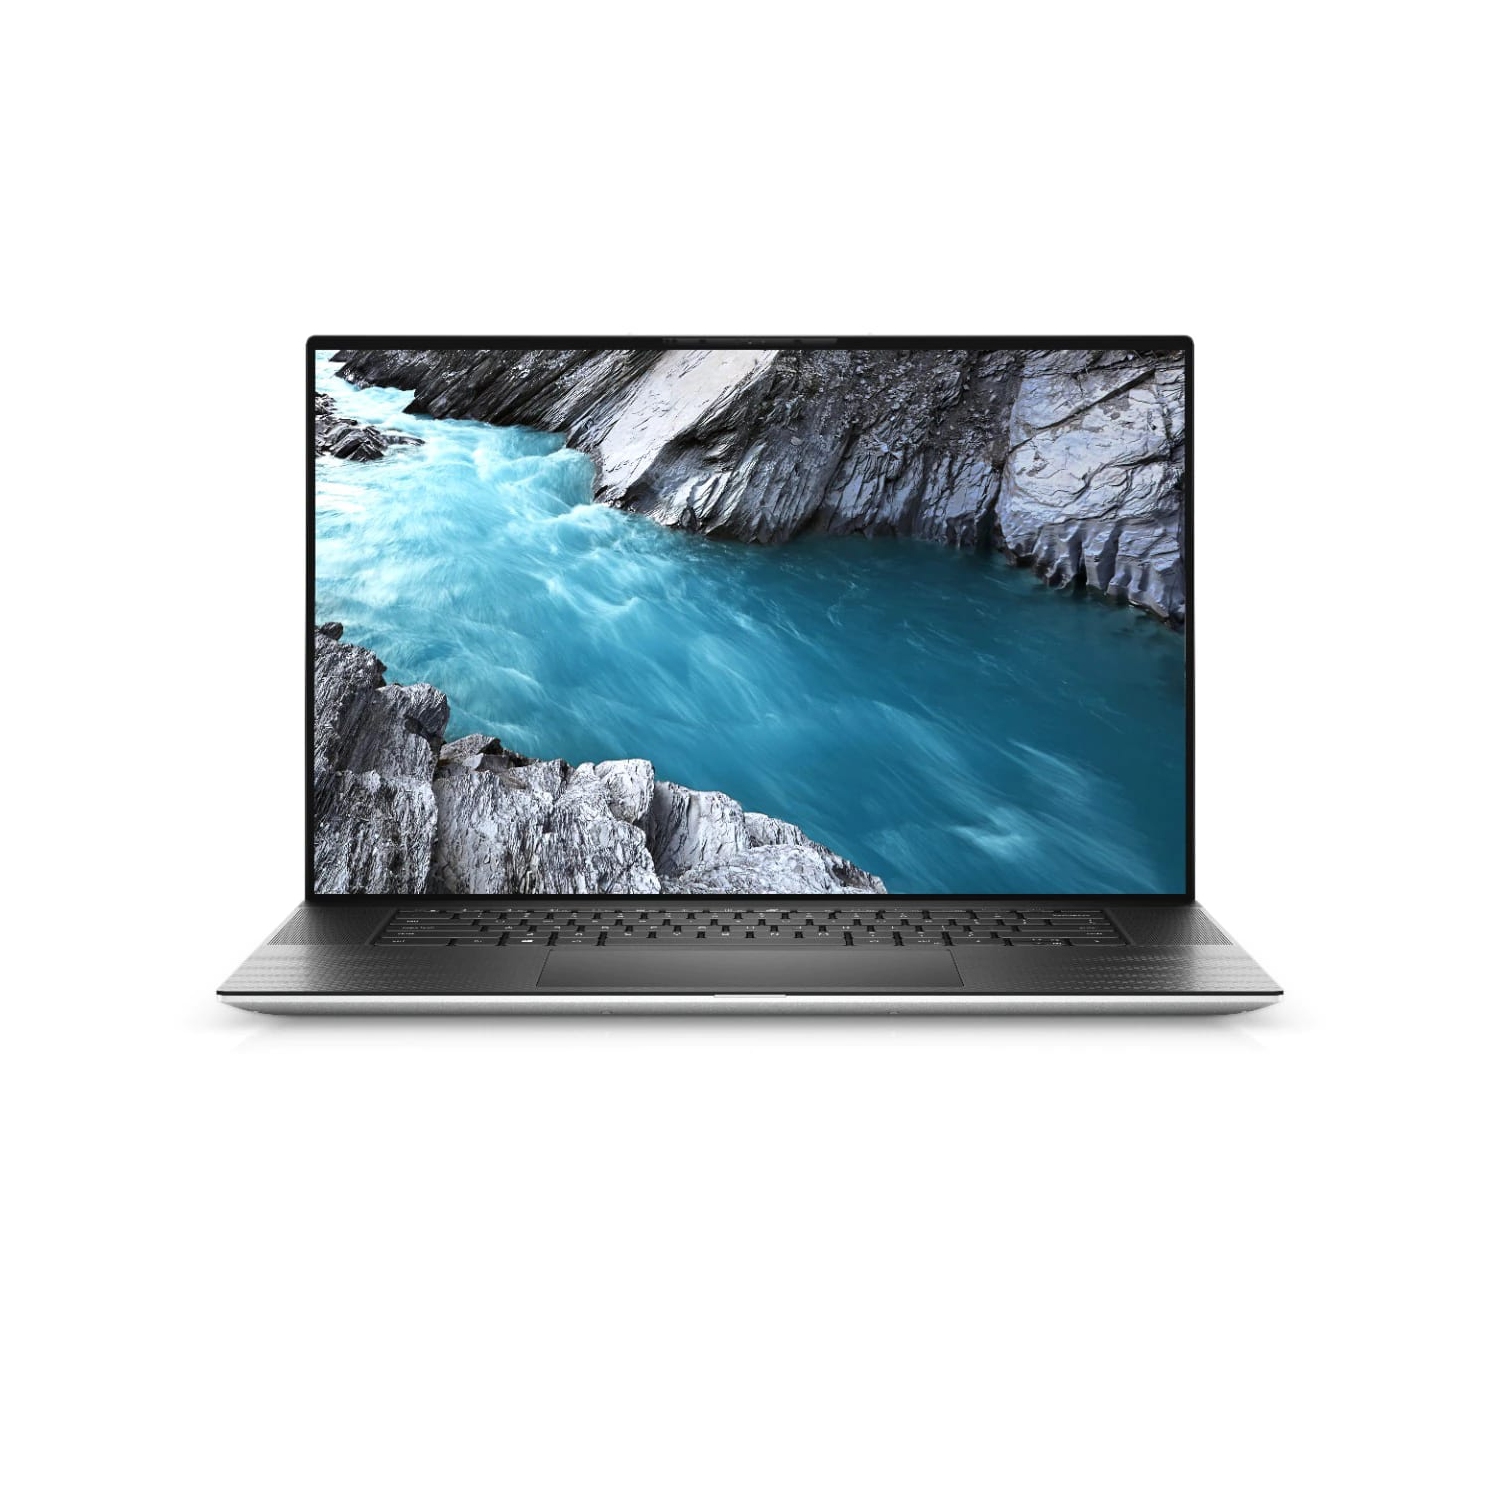 Refurbished (Excellent) - Dell XPS 17 9700 Laptop (2020) | 17" FHD+ | Core i7 - 512GB SSD - 16GB RAM - RTX 2060 | 8 Cores @ 5.1 GHz - 10th Gen CPU Certified Refurbished